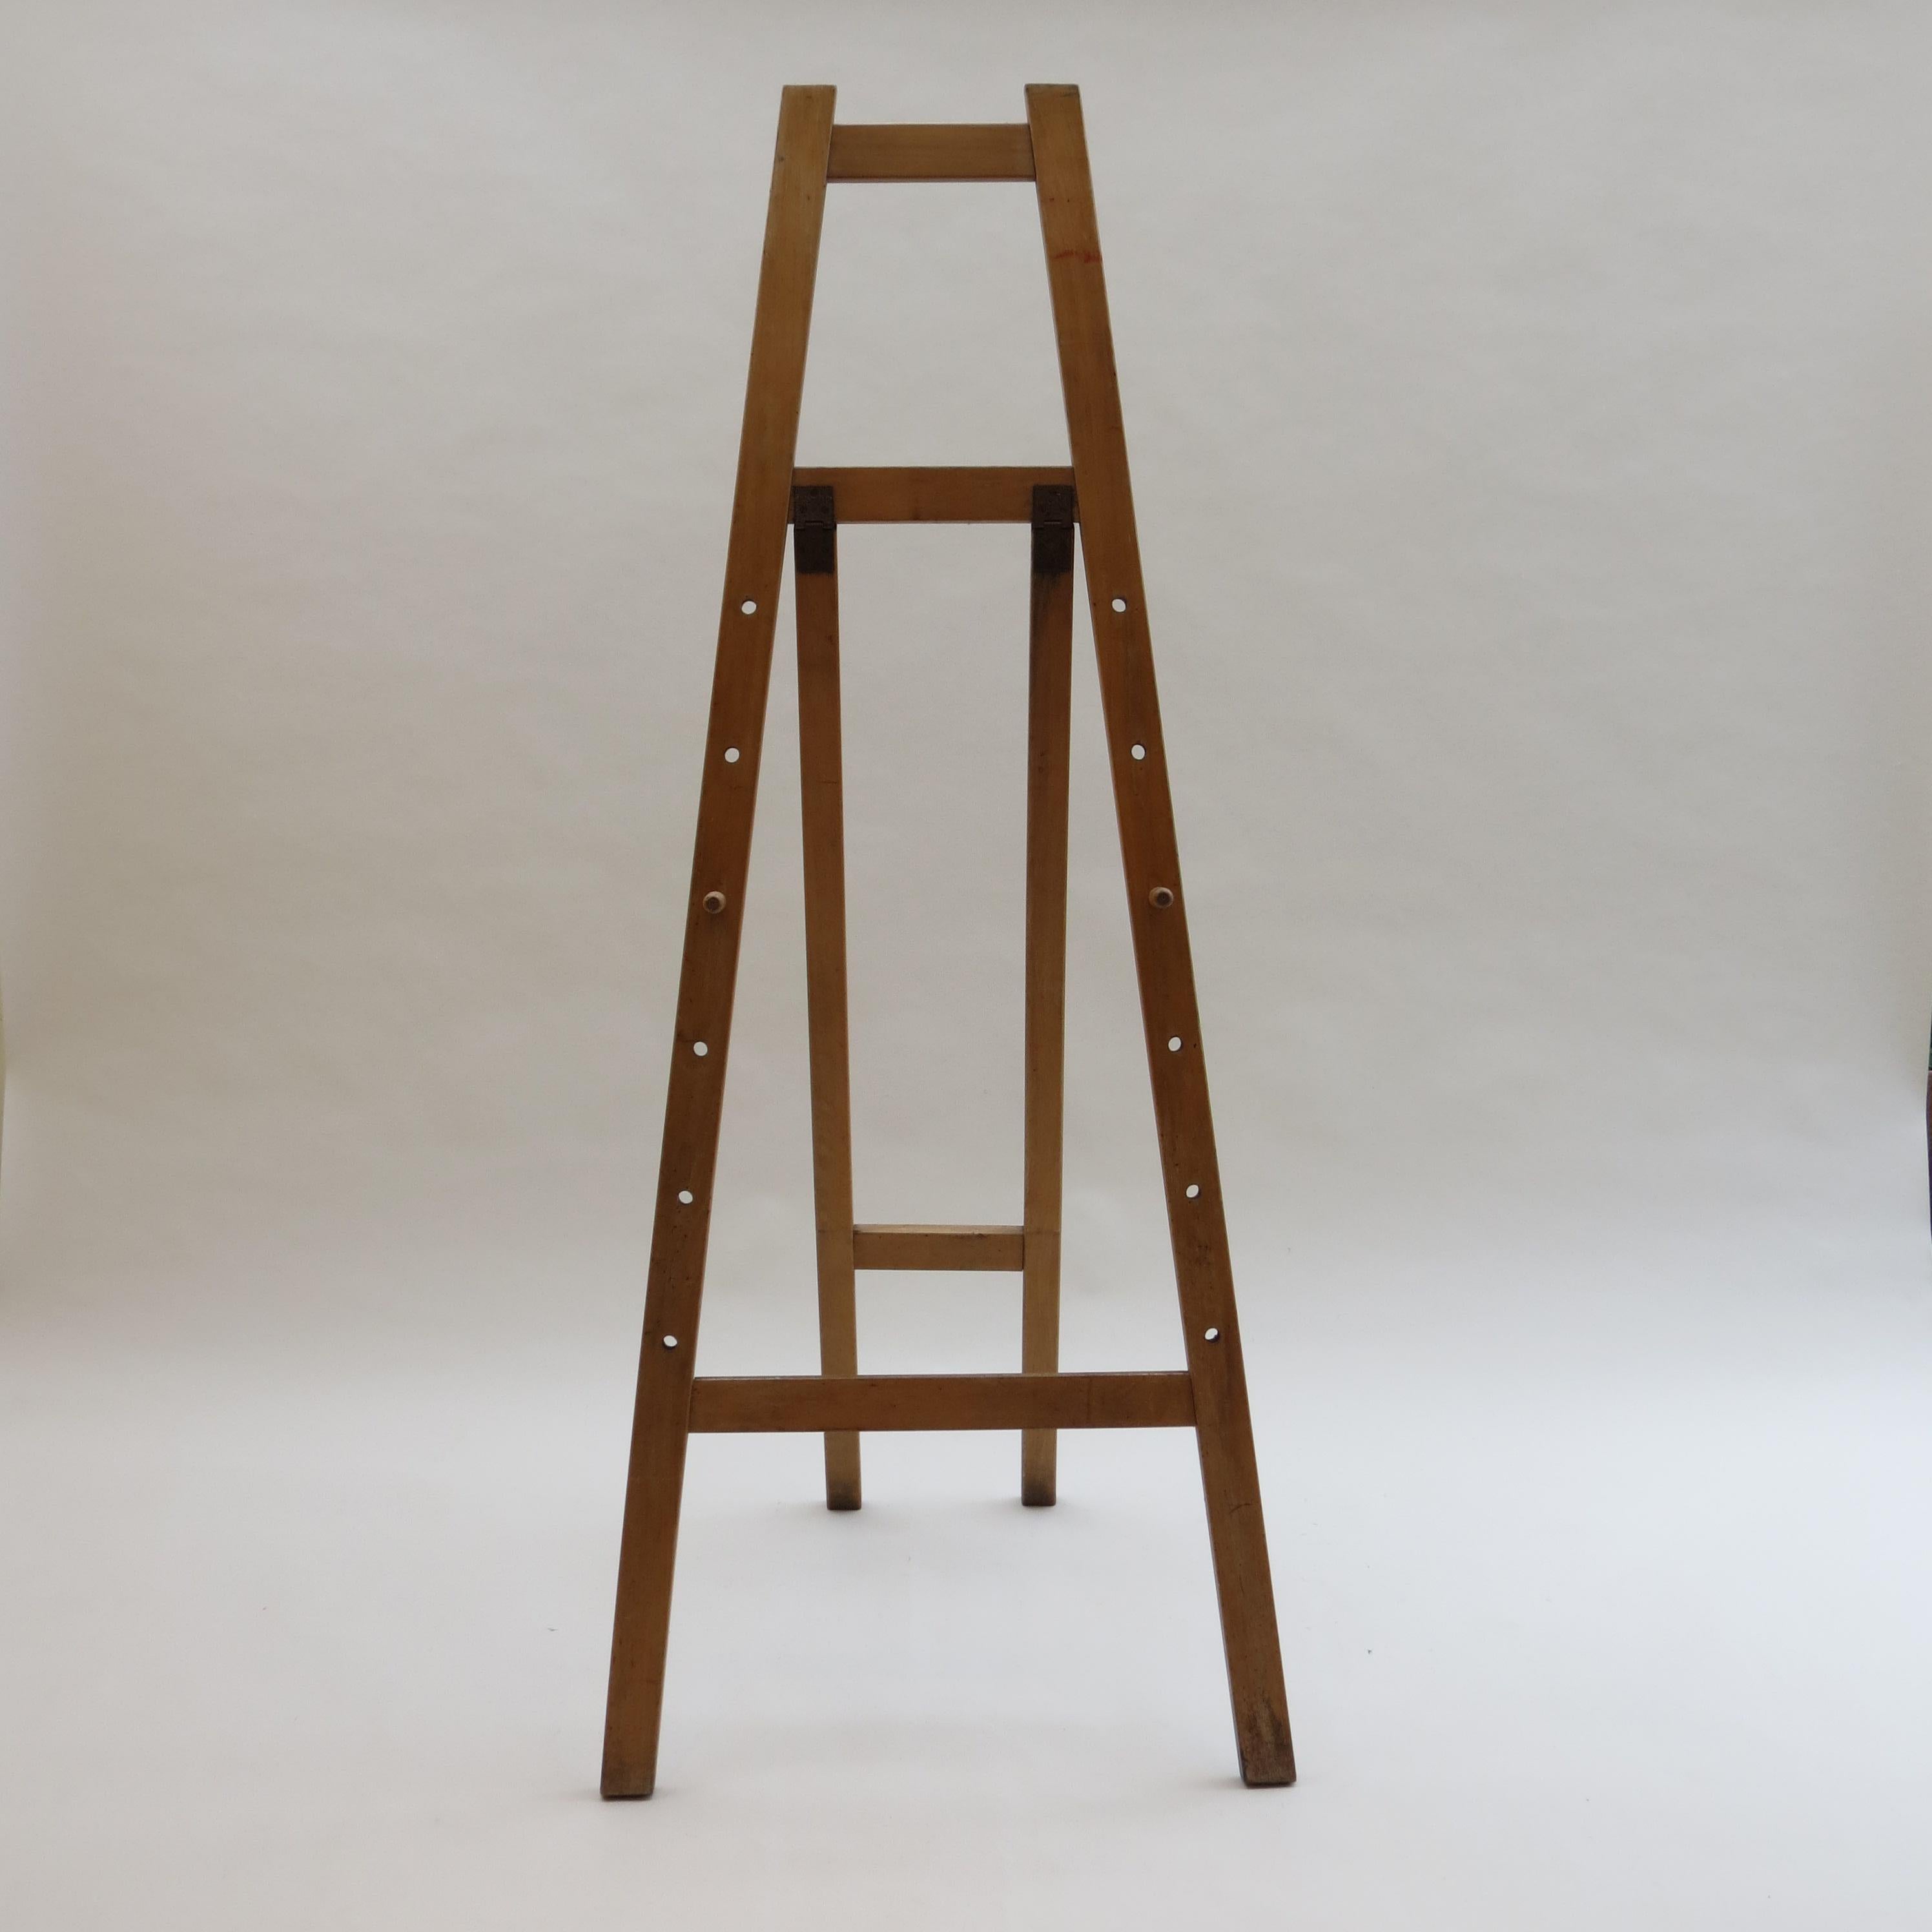 Large wooden easel by Esavian. Originally used in schools to display a blackboard. Two wooden adjustable pegs slot into the uprights. The easel folds flat when not in use. Stamped ESA Esavian Made in Britain.

ST1106
Measures: 173cm tall 73cm,